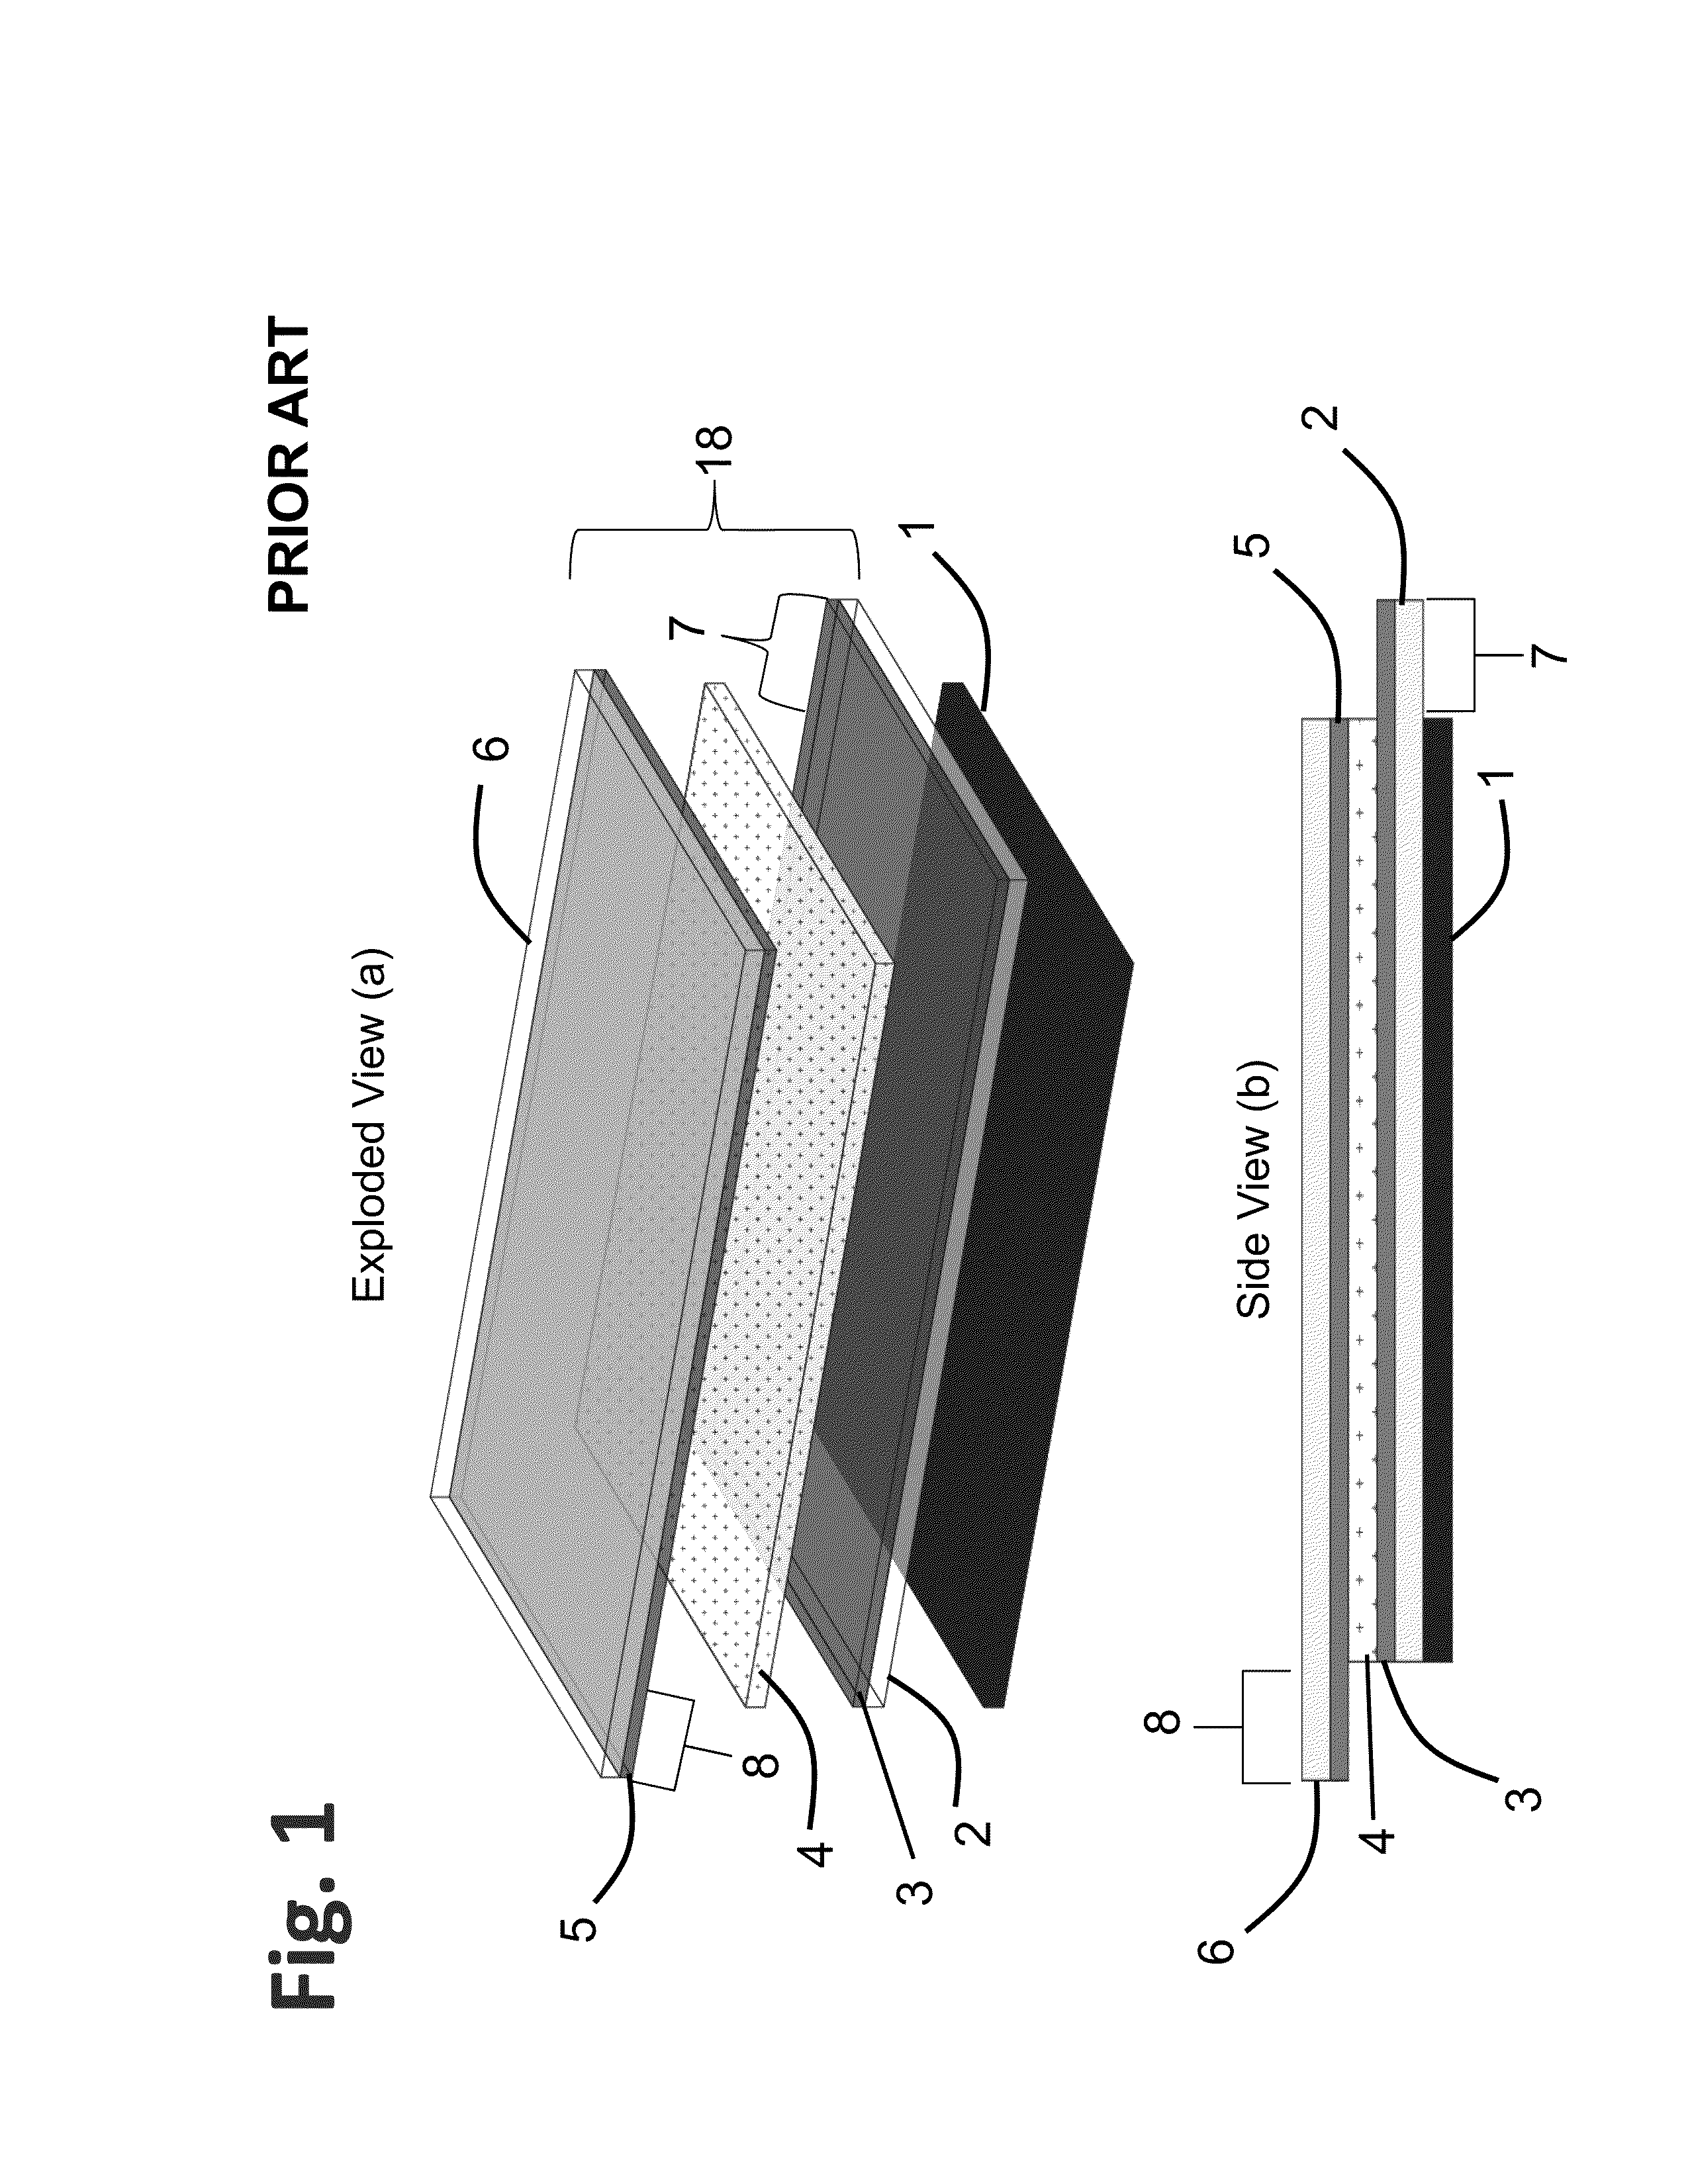 Electronic display with semitransparent back layer